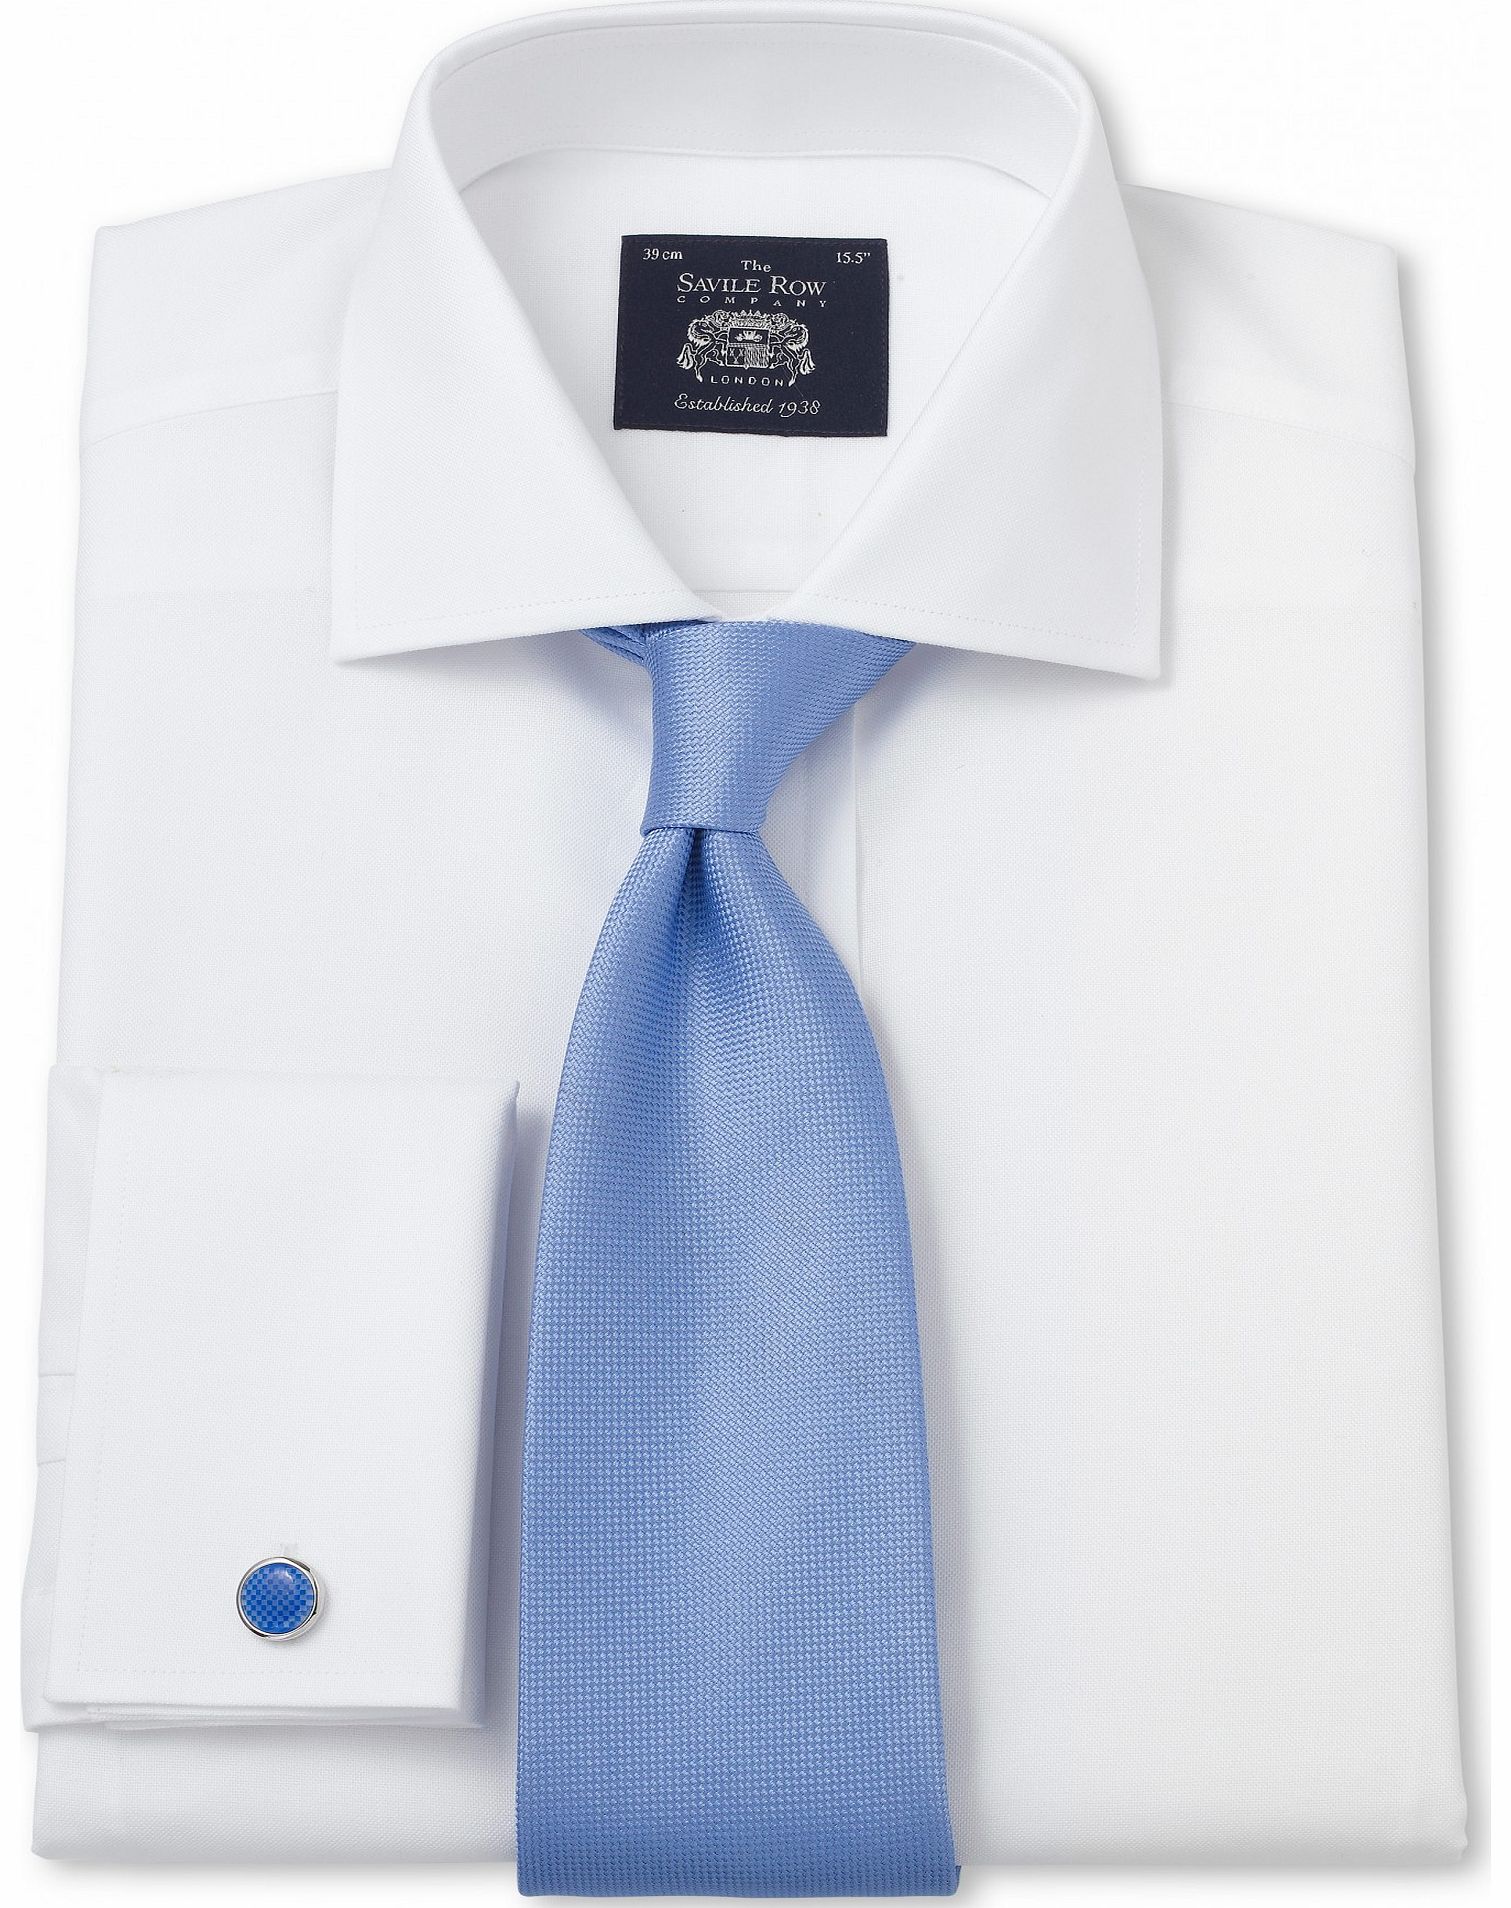 Savile Row Company White Pinpoint Slim Fit Shirt 18`` Lengthened